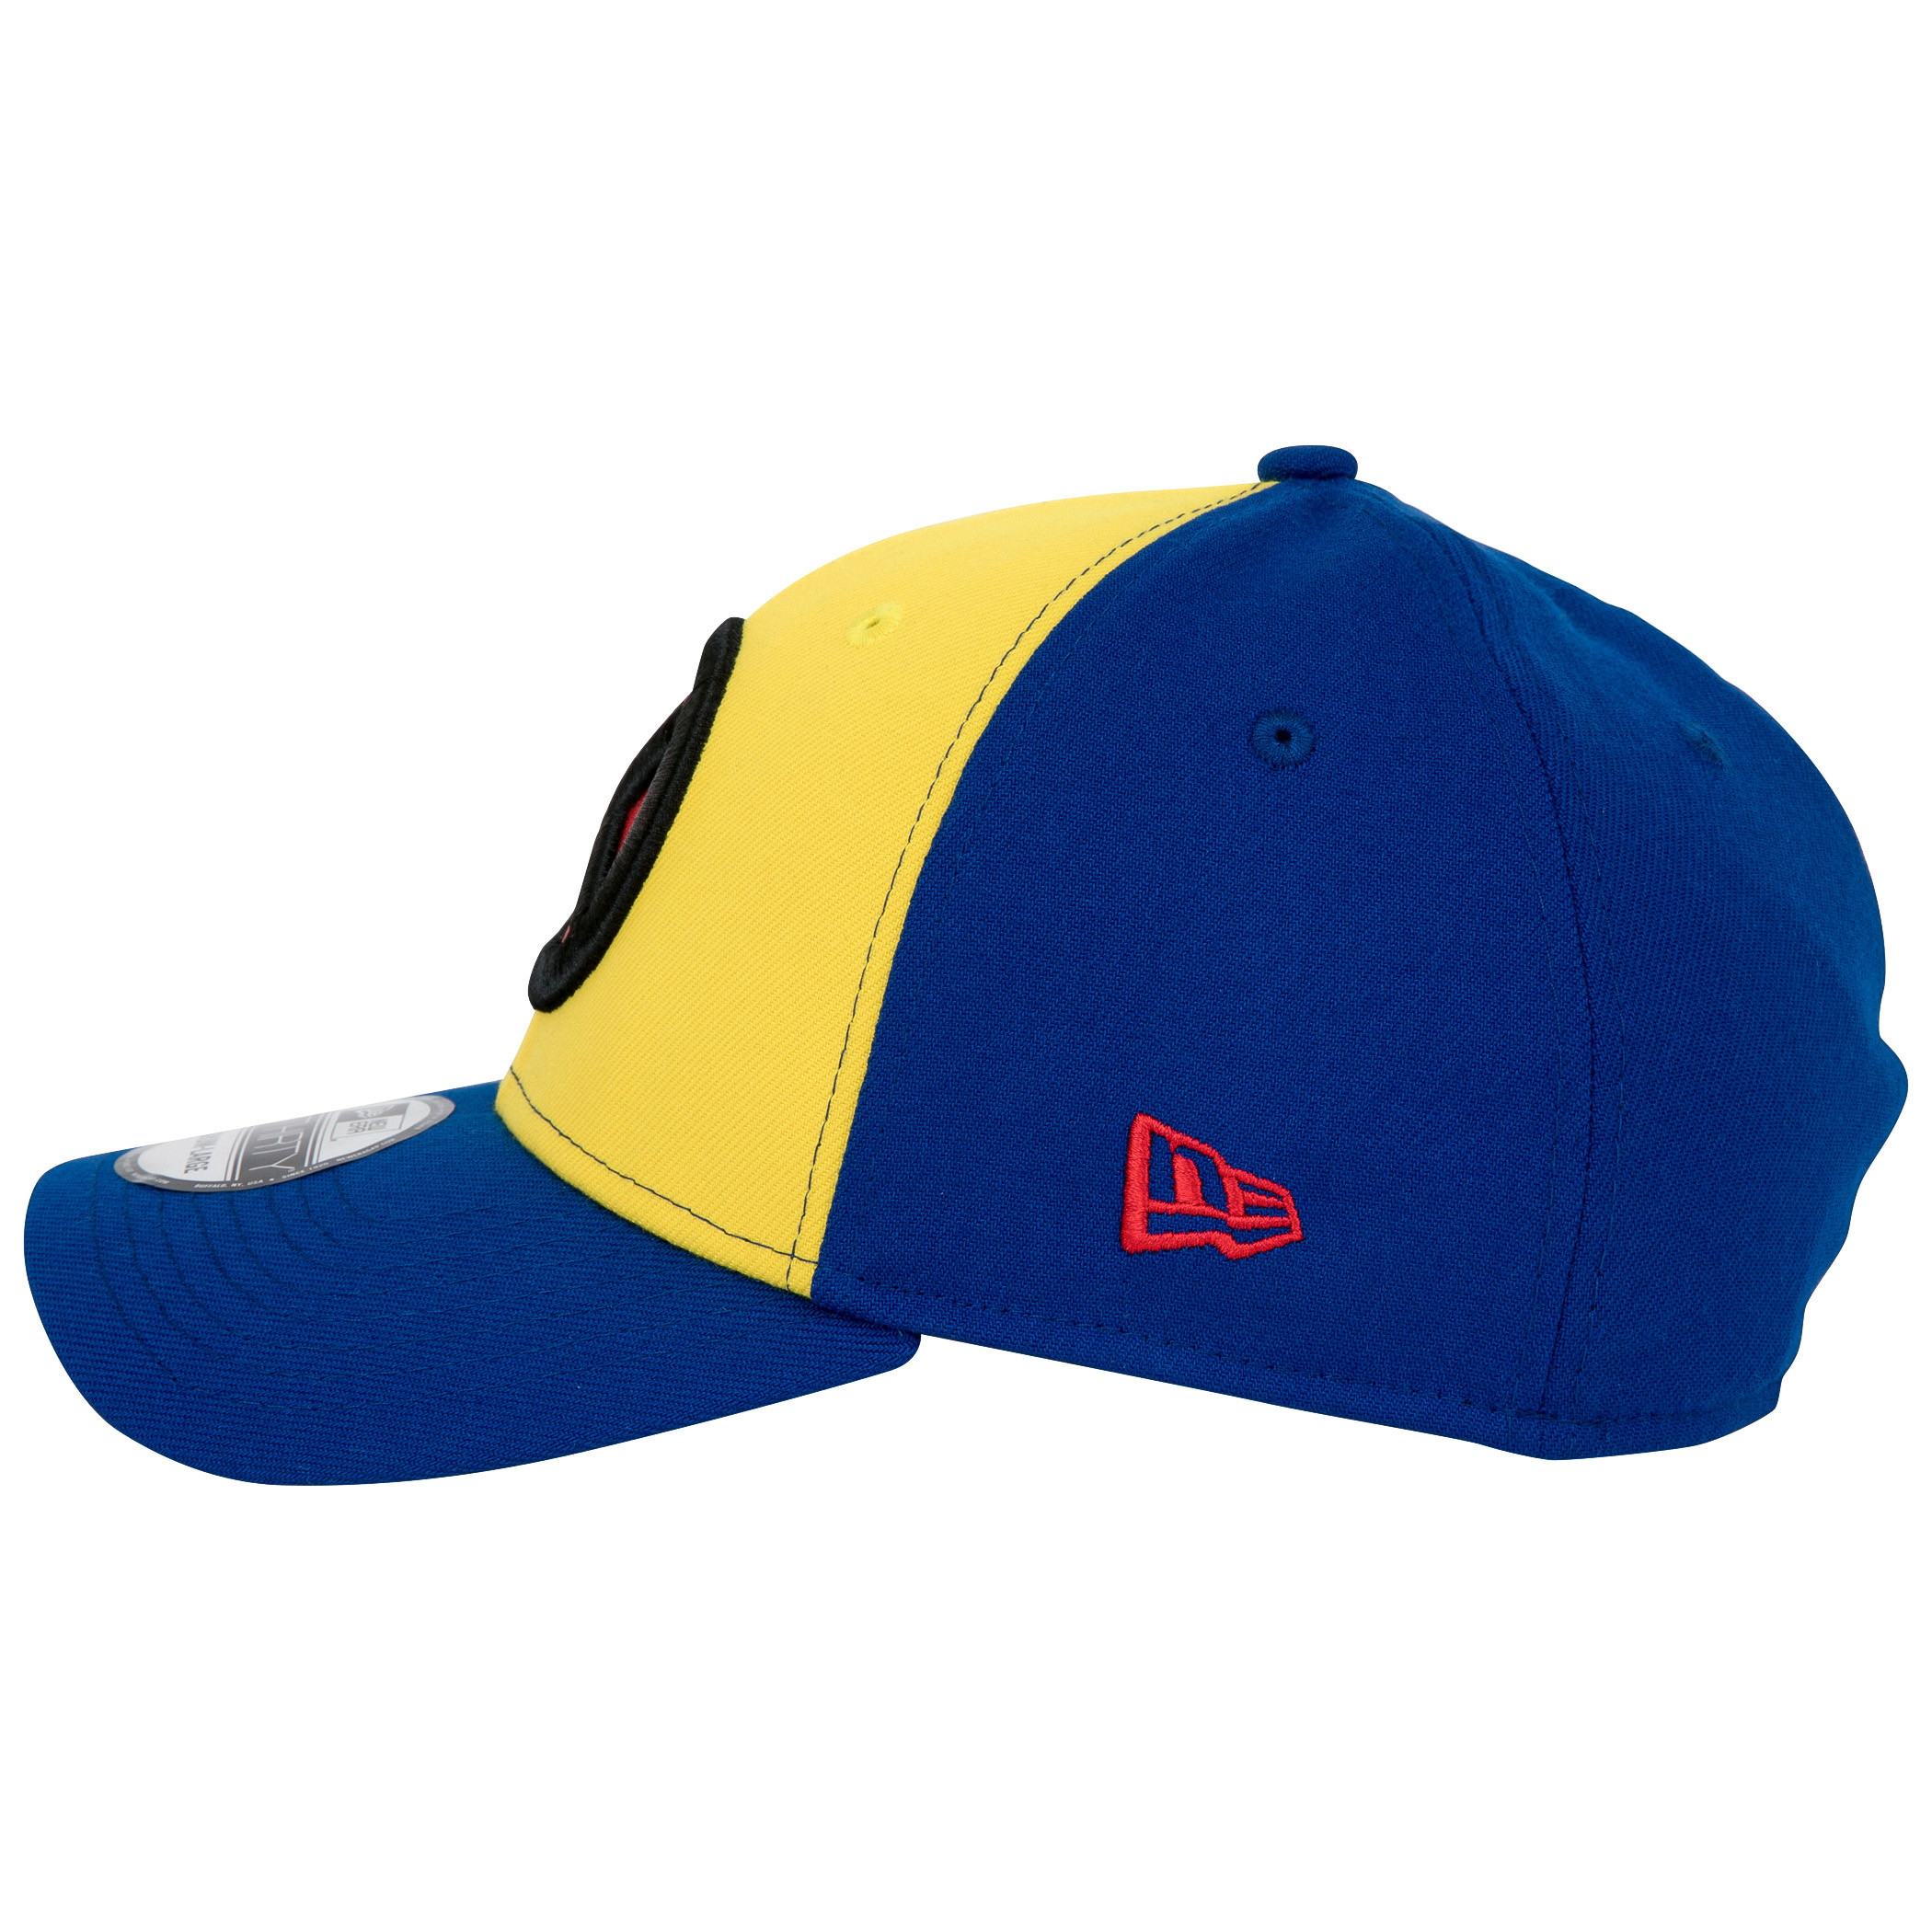 X-Men Symbol Wolverine Two-Tone Colorway New Era 39Thirty Fitted Hat